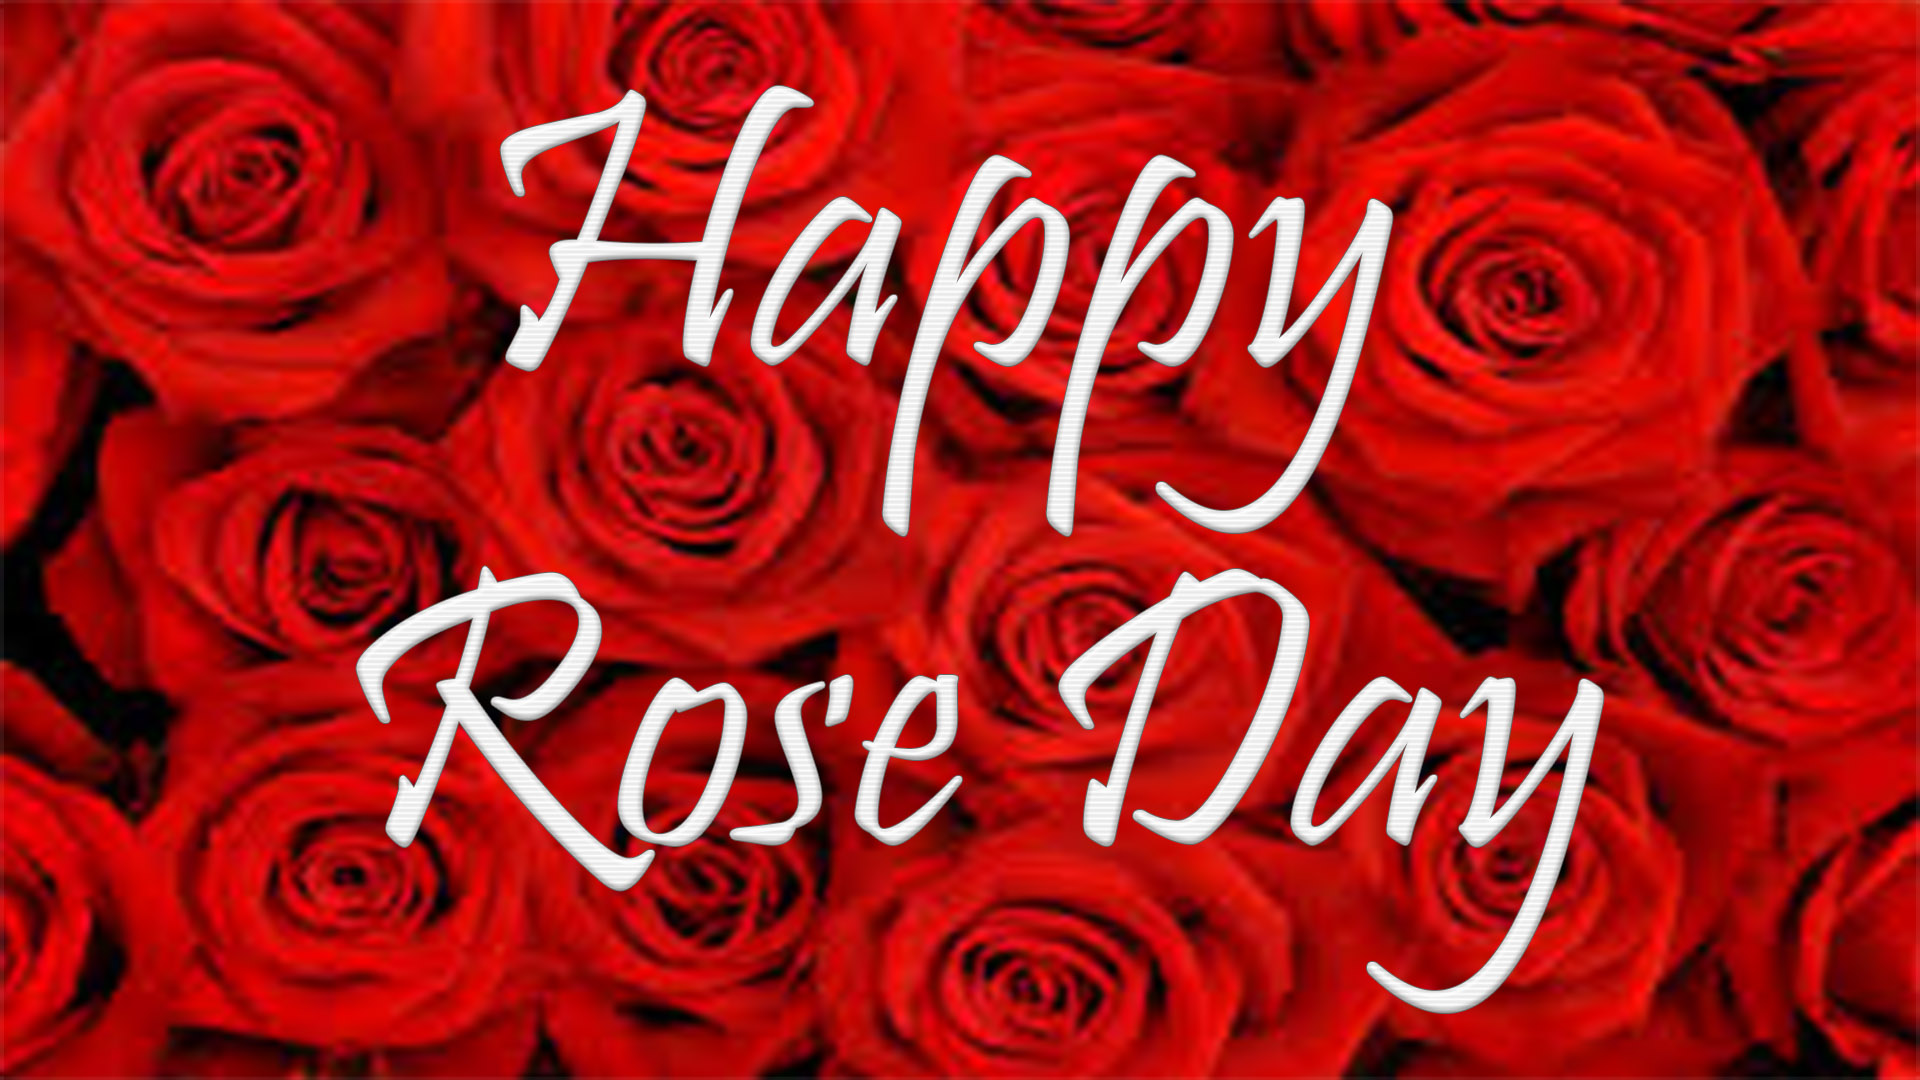 happy rose day hd picture